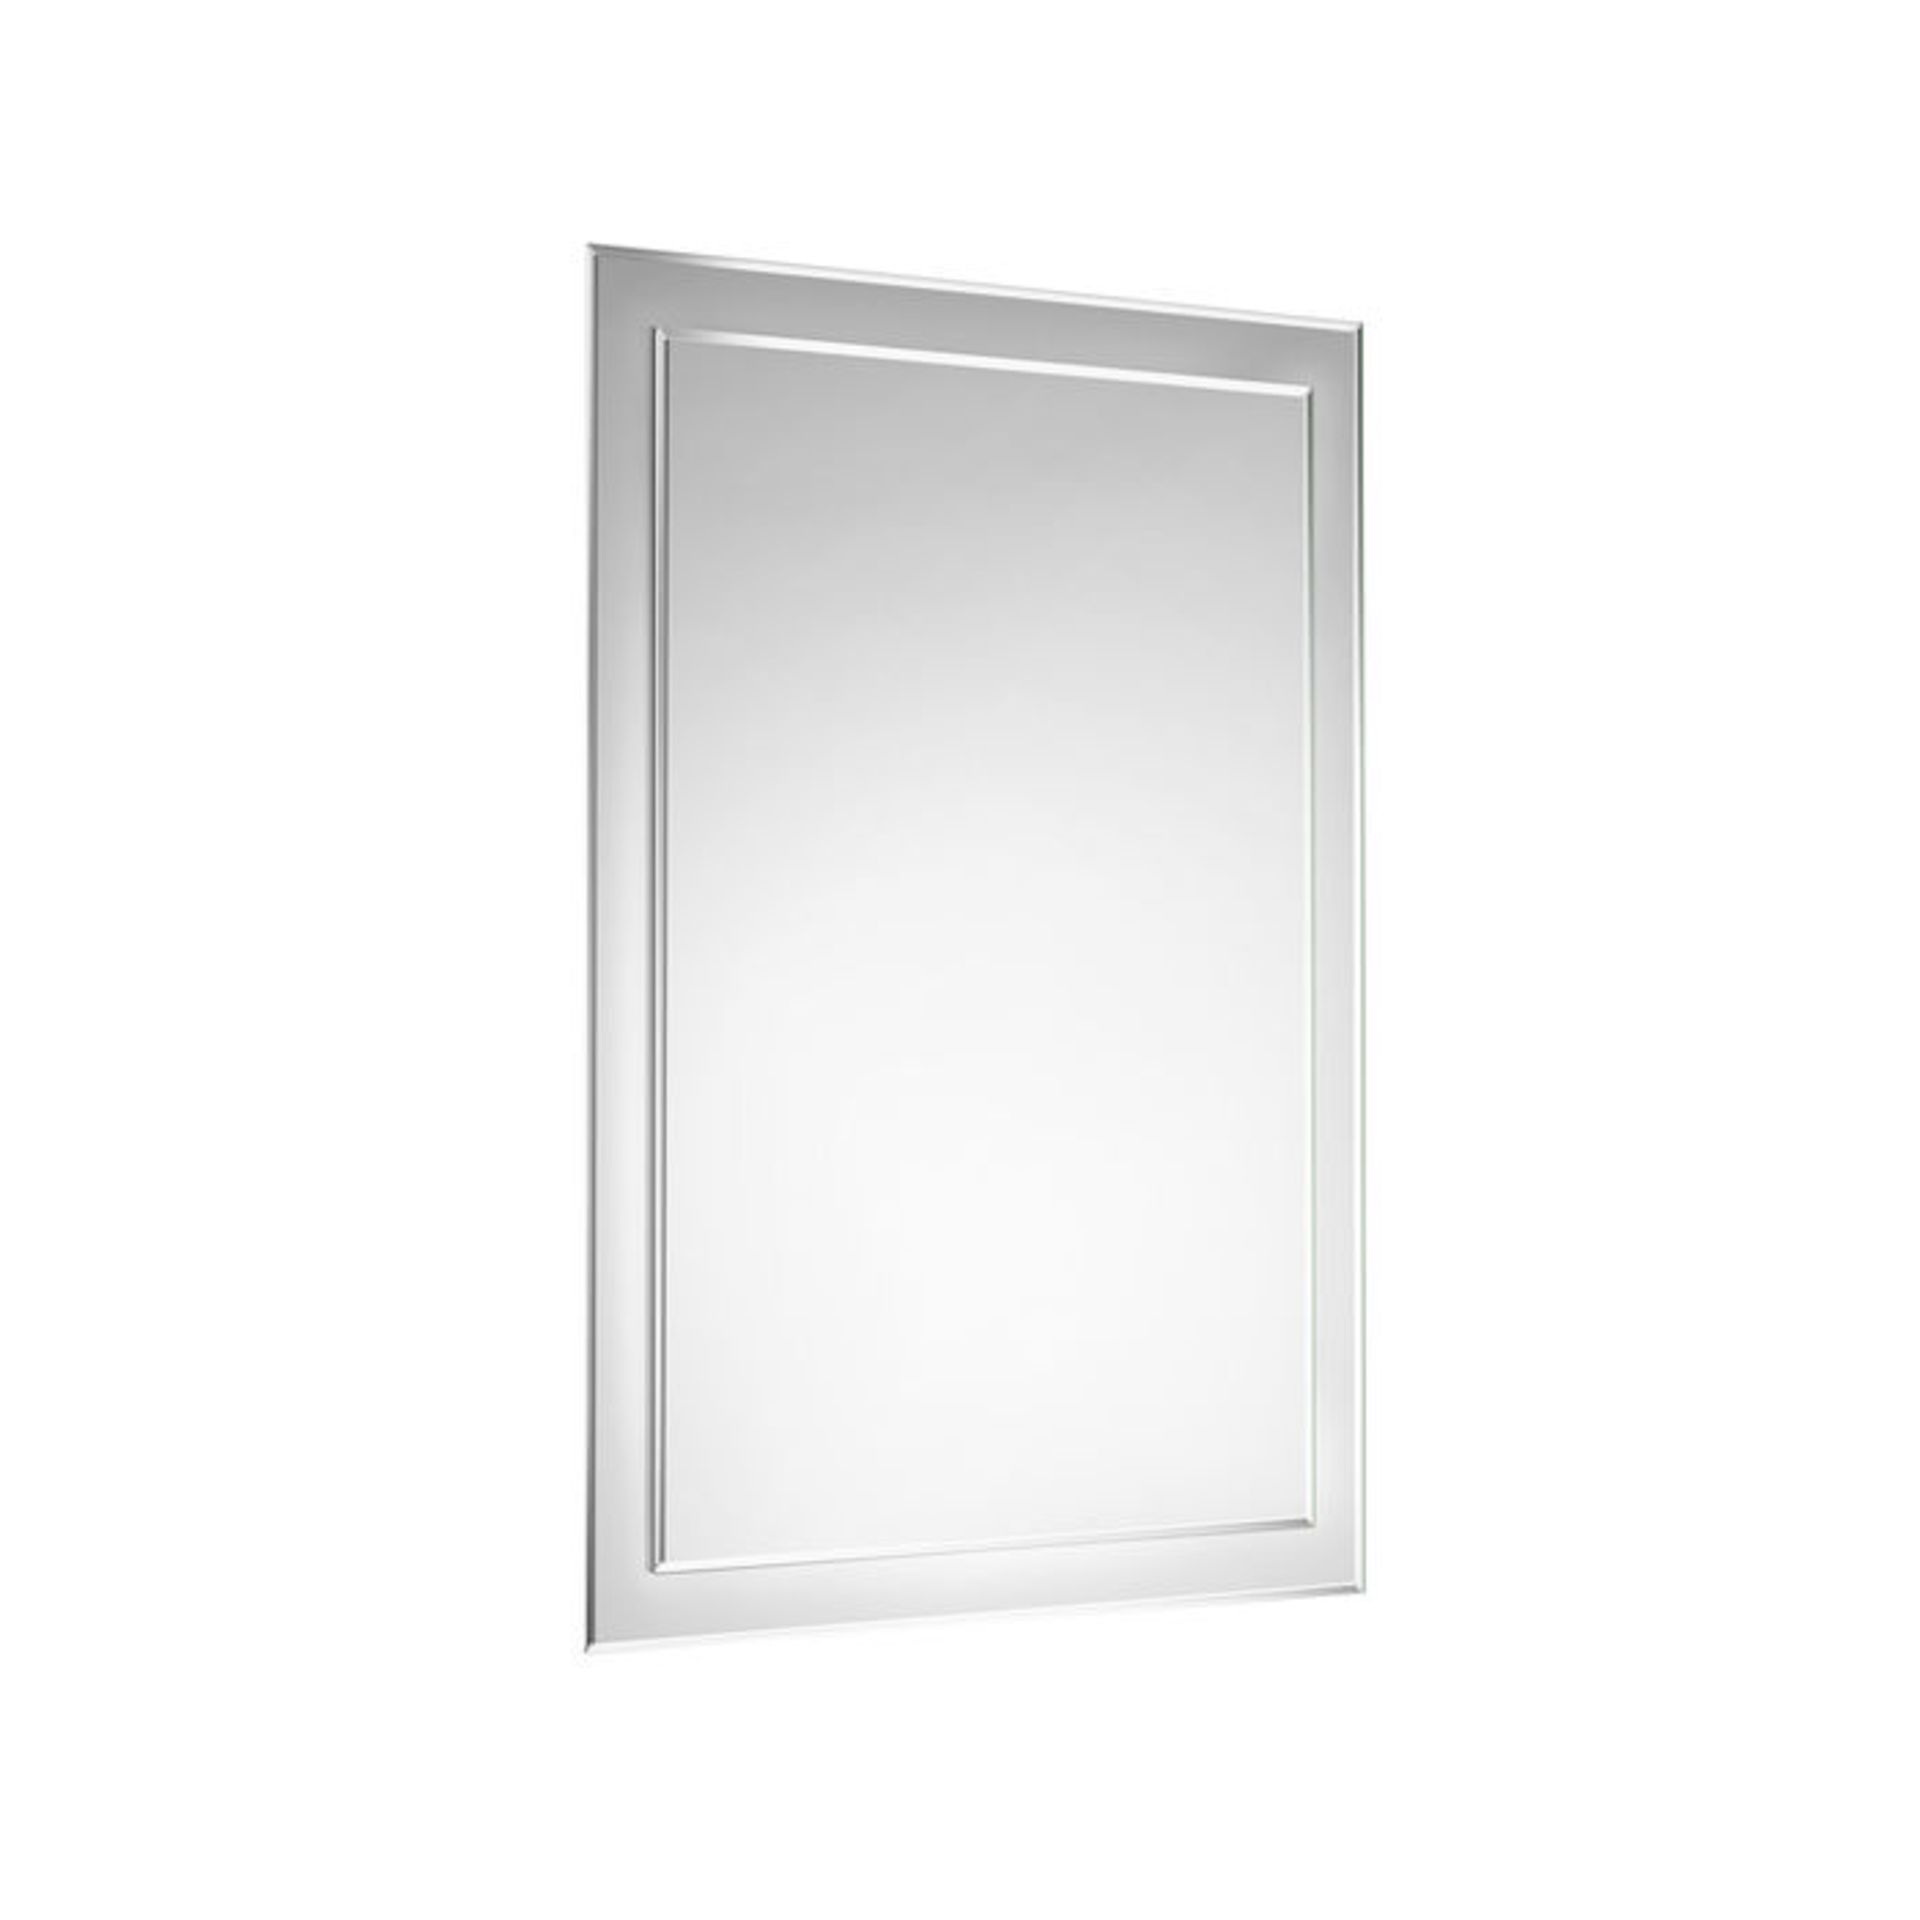 (JM107) 500x700mm Bevel Mirror. Comes fully assembled for added convenience Versatile with a